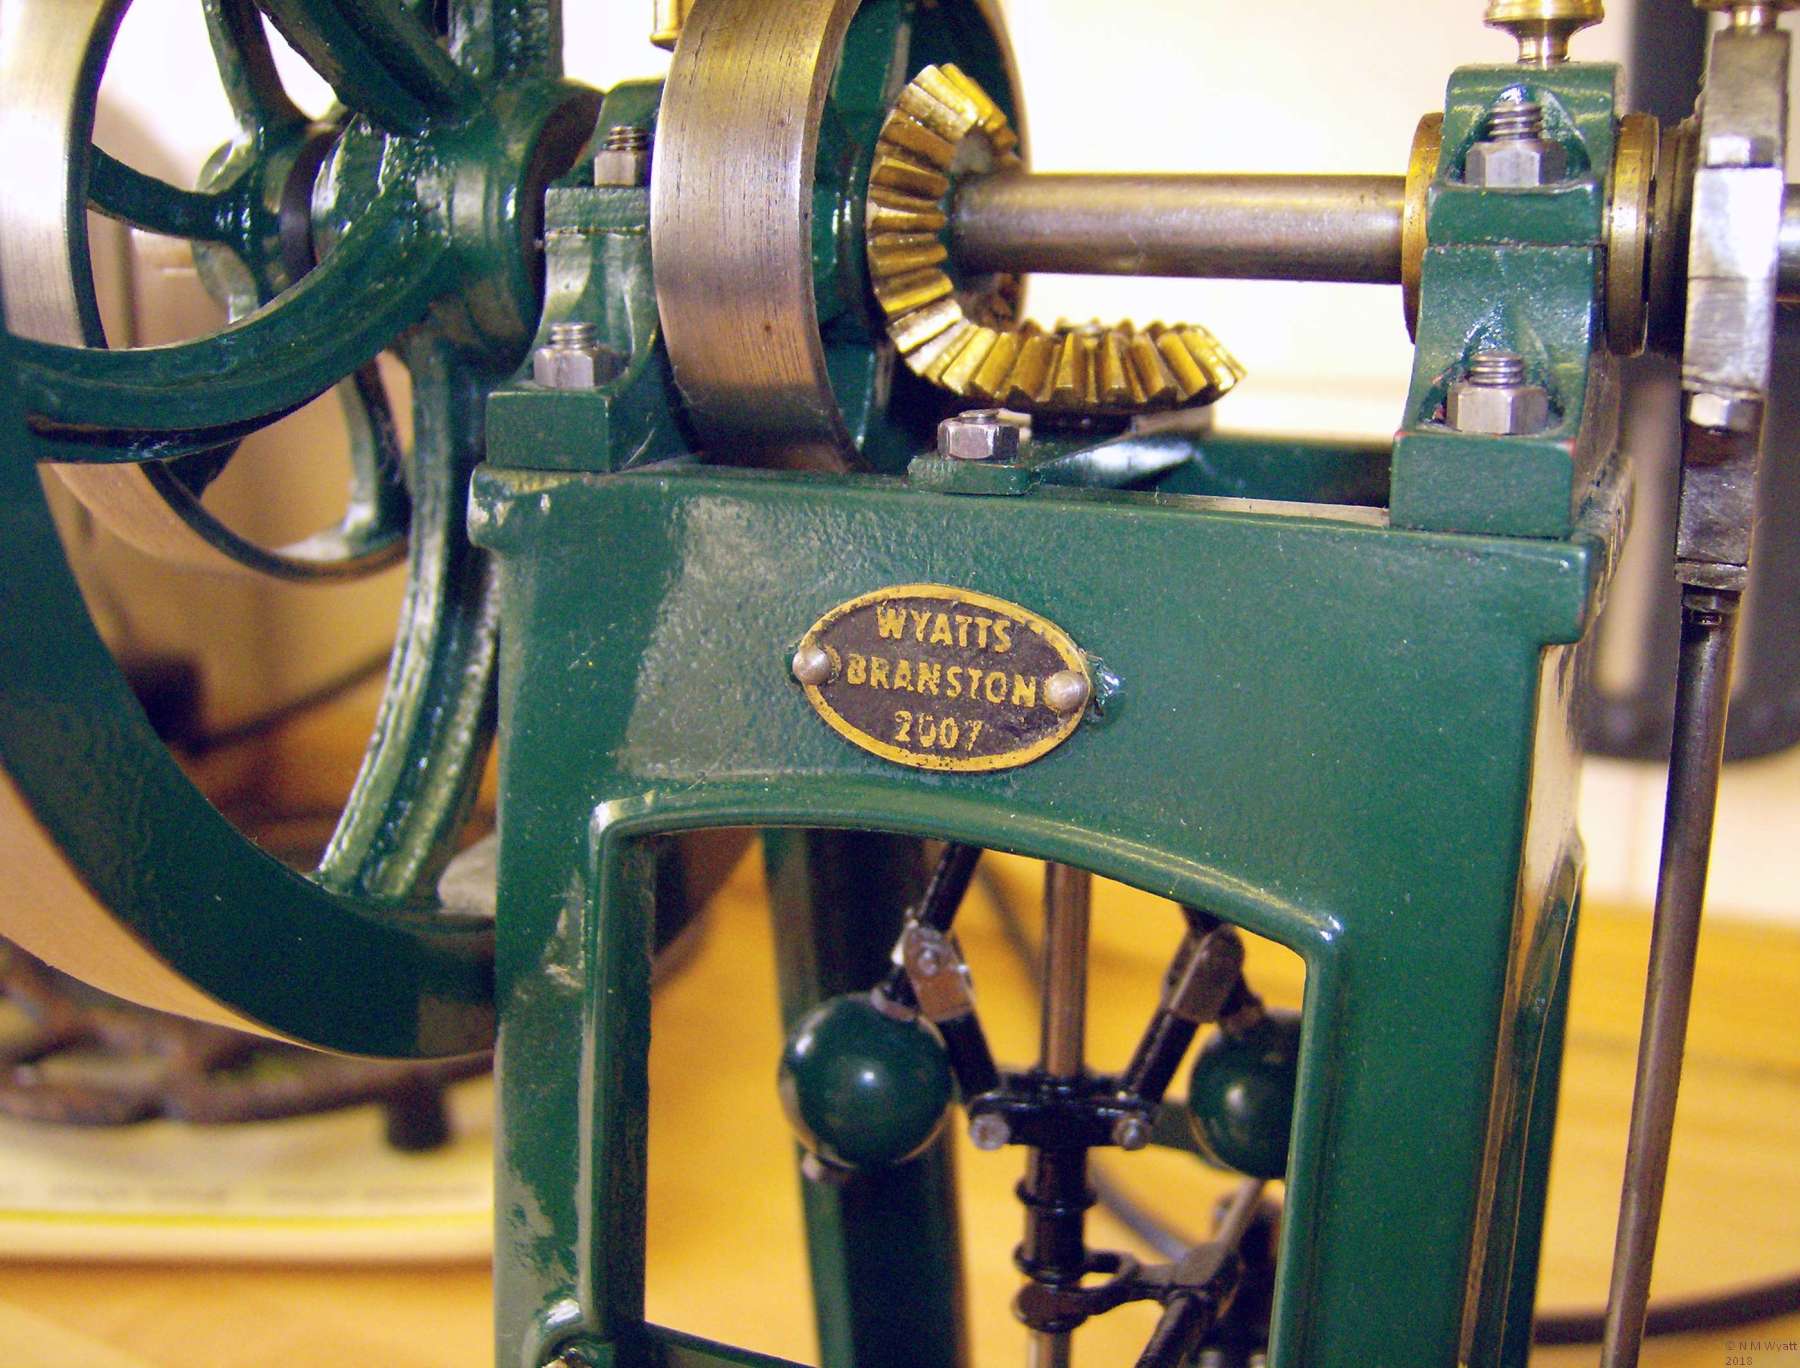 Close up of the crankshaft and governor gears